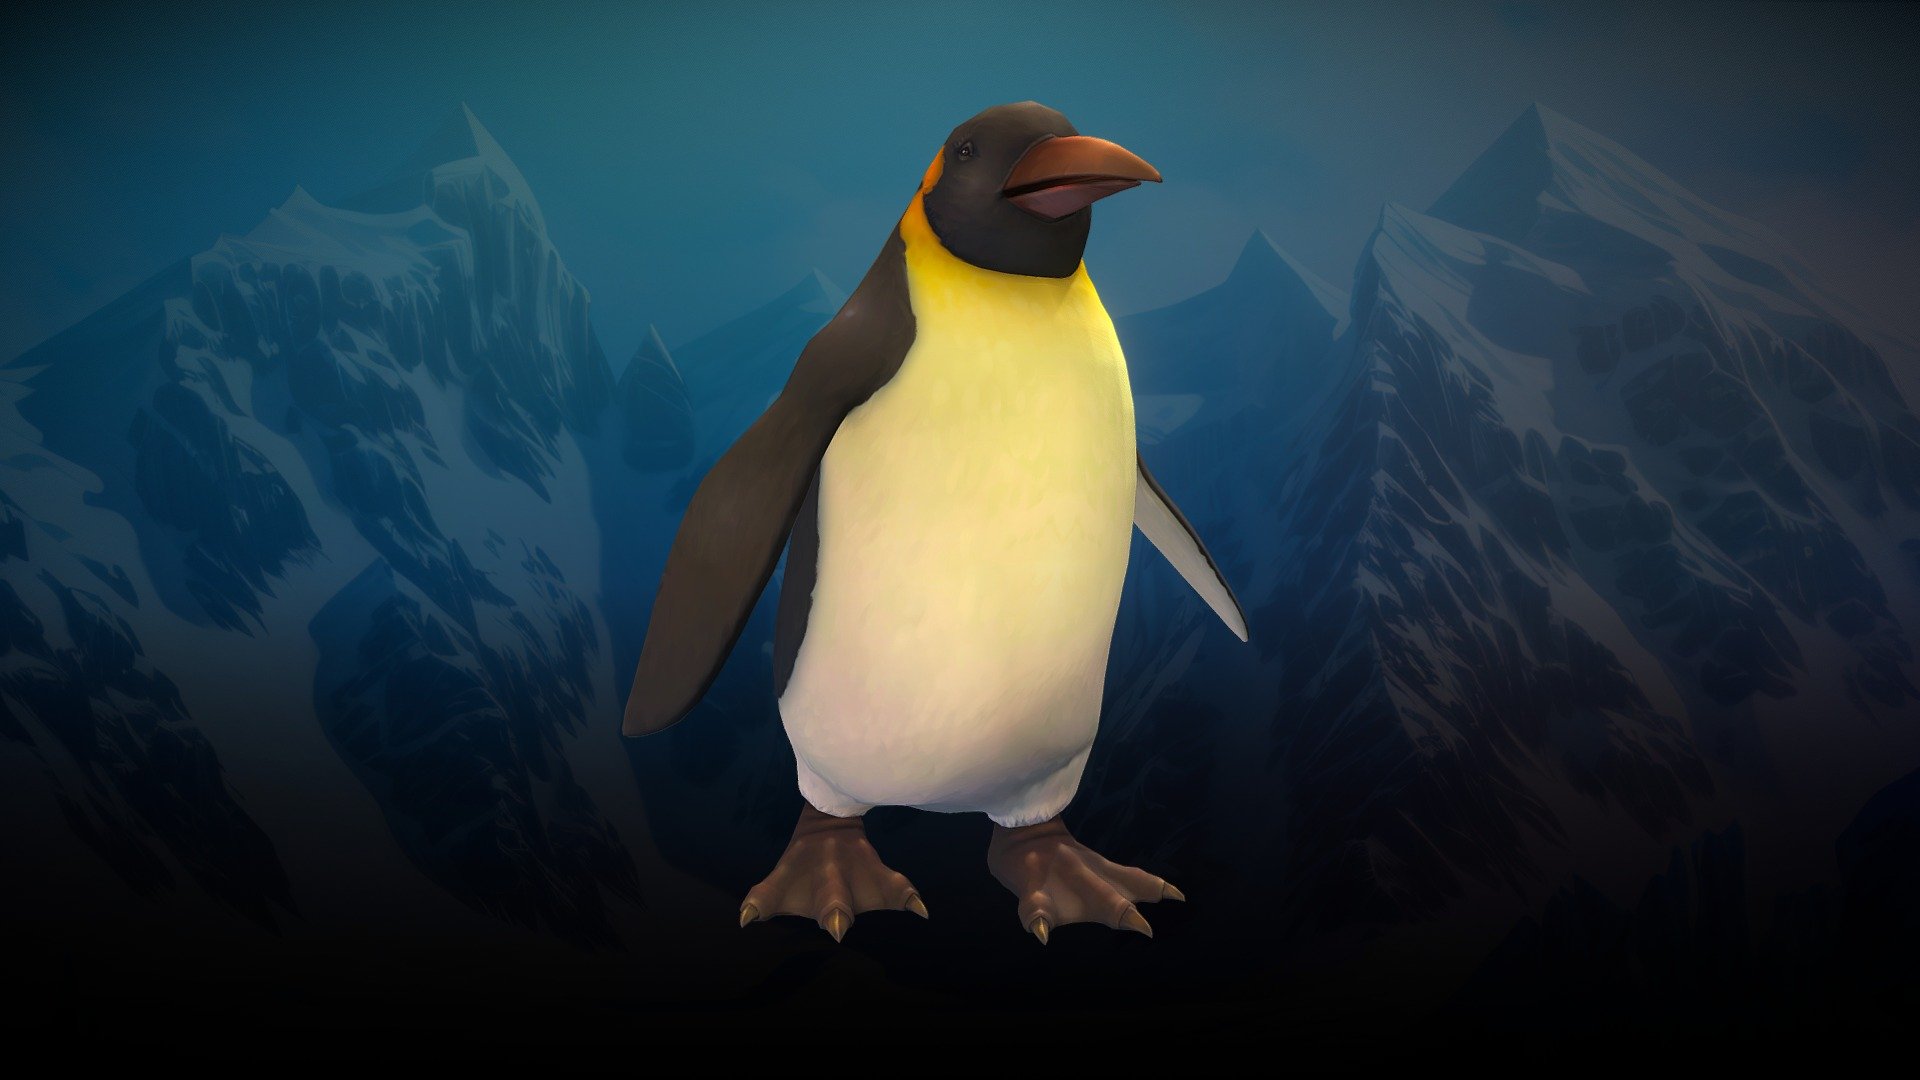 Stylized character for a project.

Software used: Zbrush, Autodesk Maya, Autodesk 3ds Max, Substance Painter - Stylized Penguin - 3D model by N-hance Studio (@Malice6731) 3d model